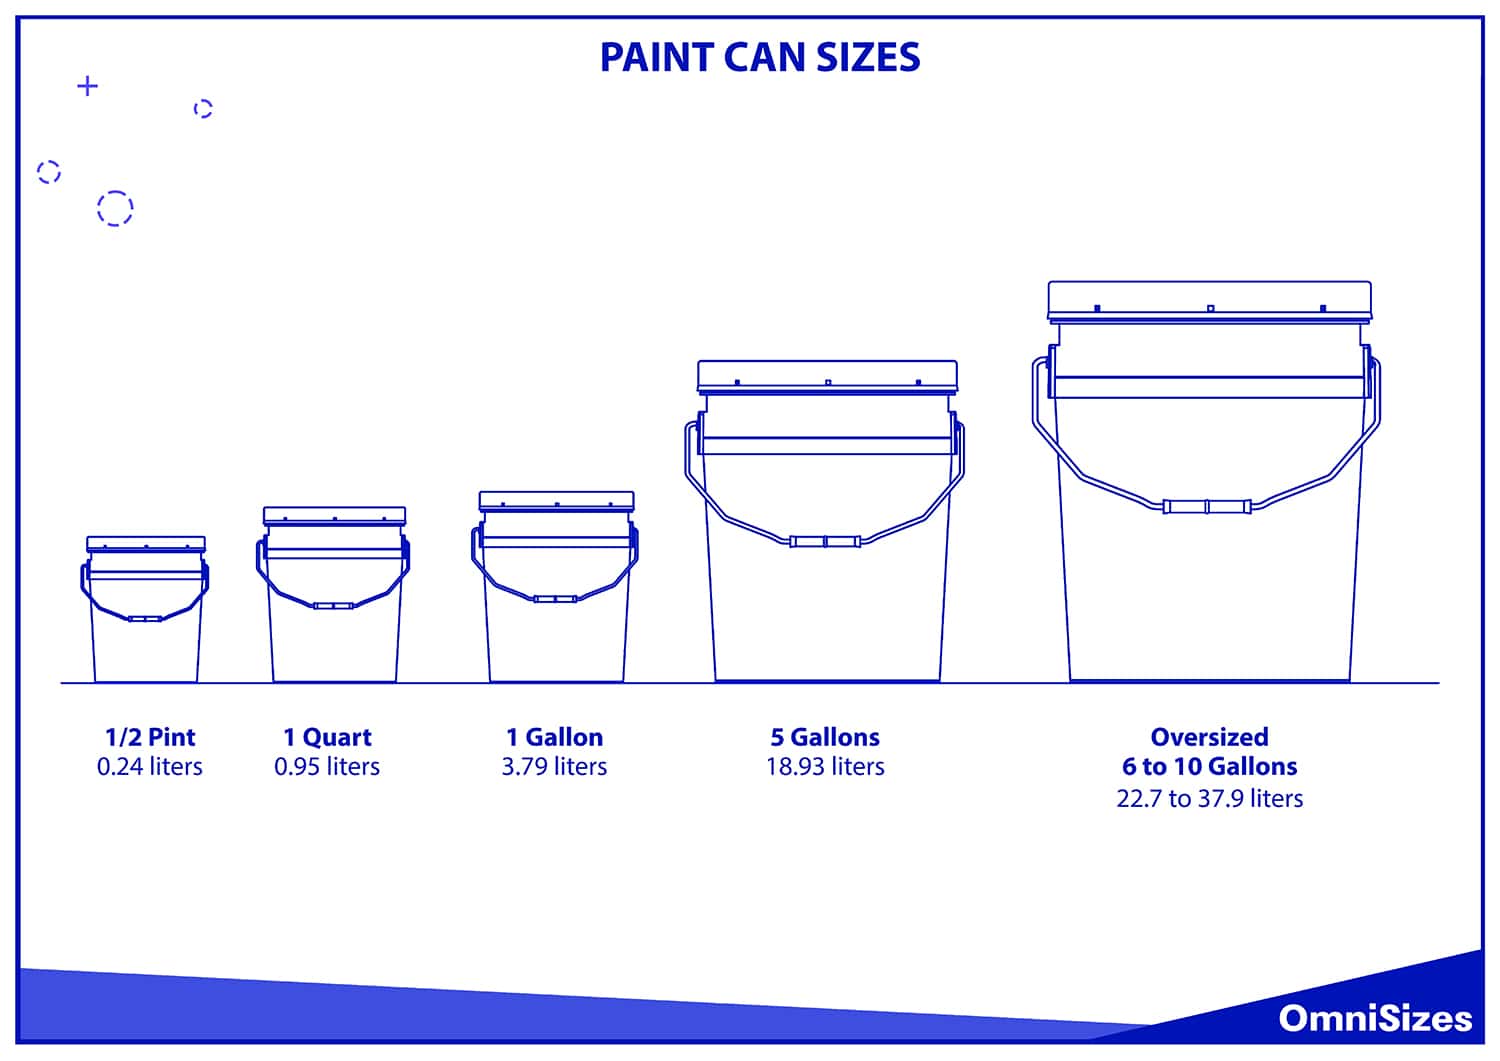 Paint can sizes